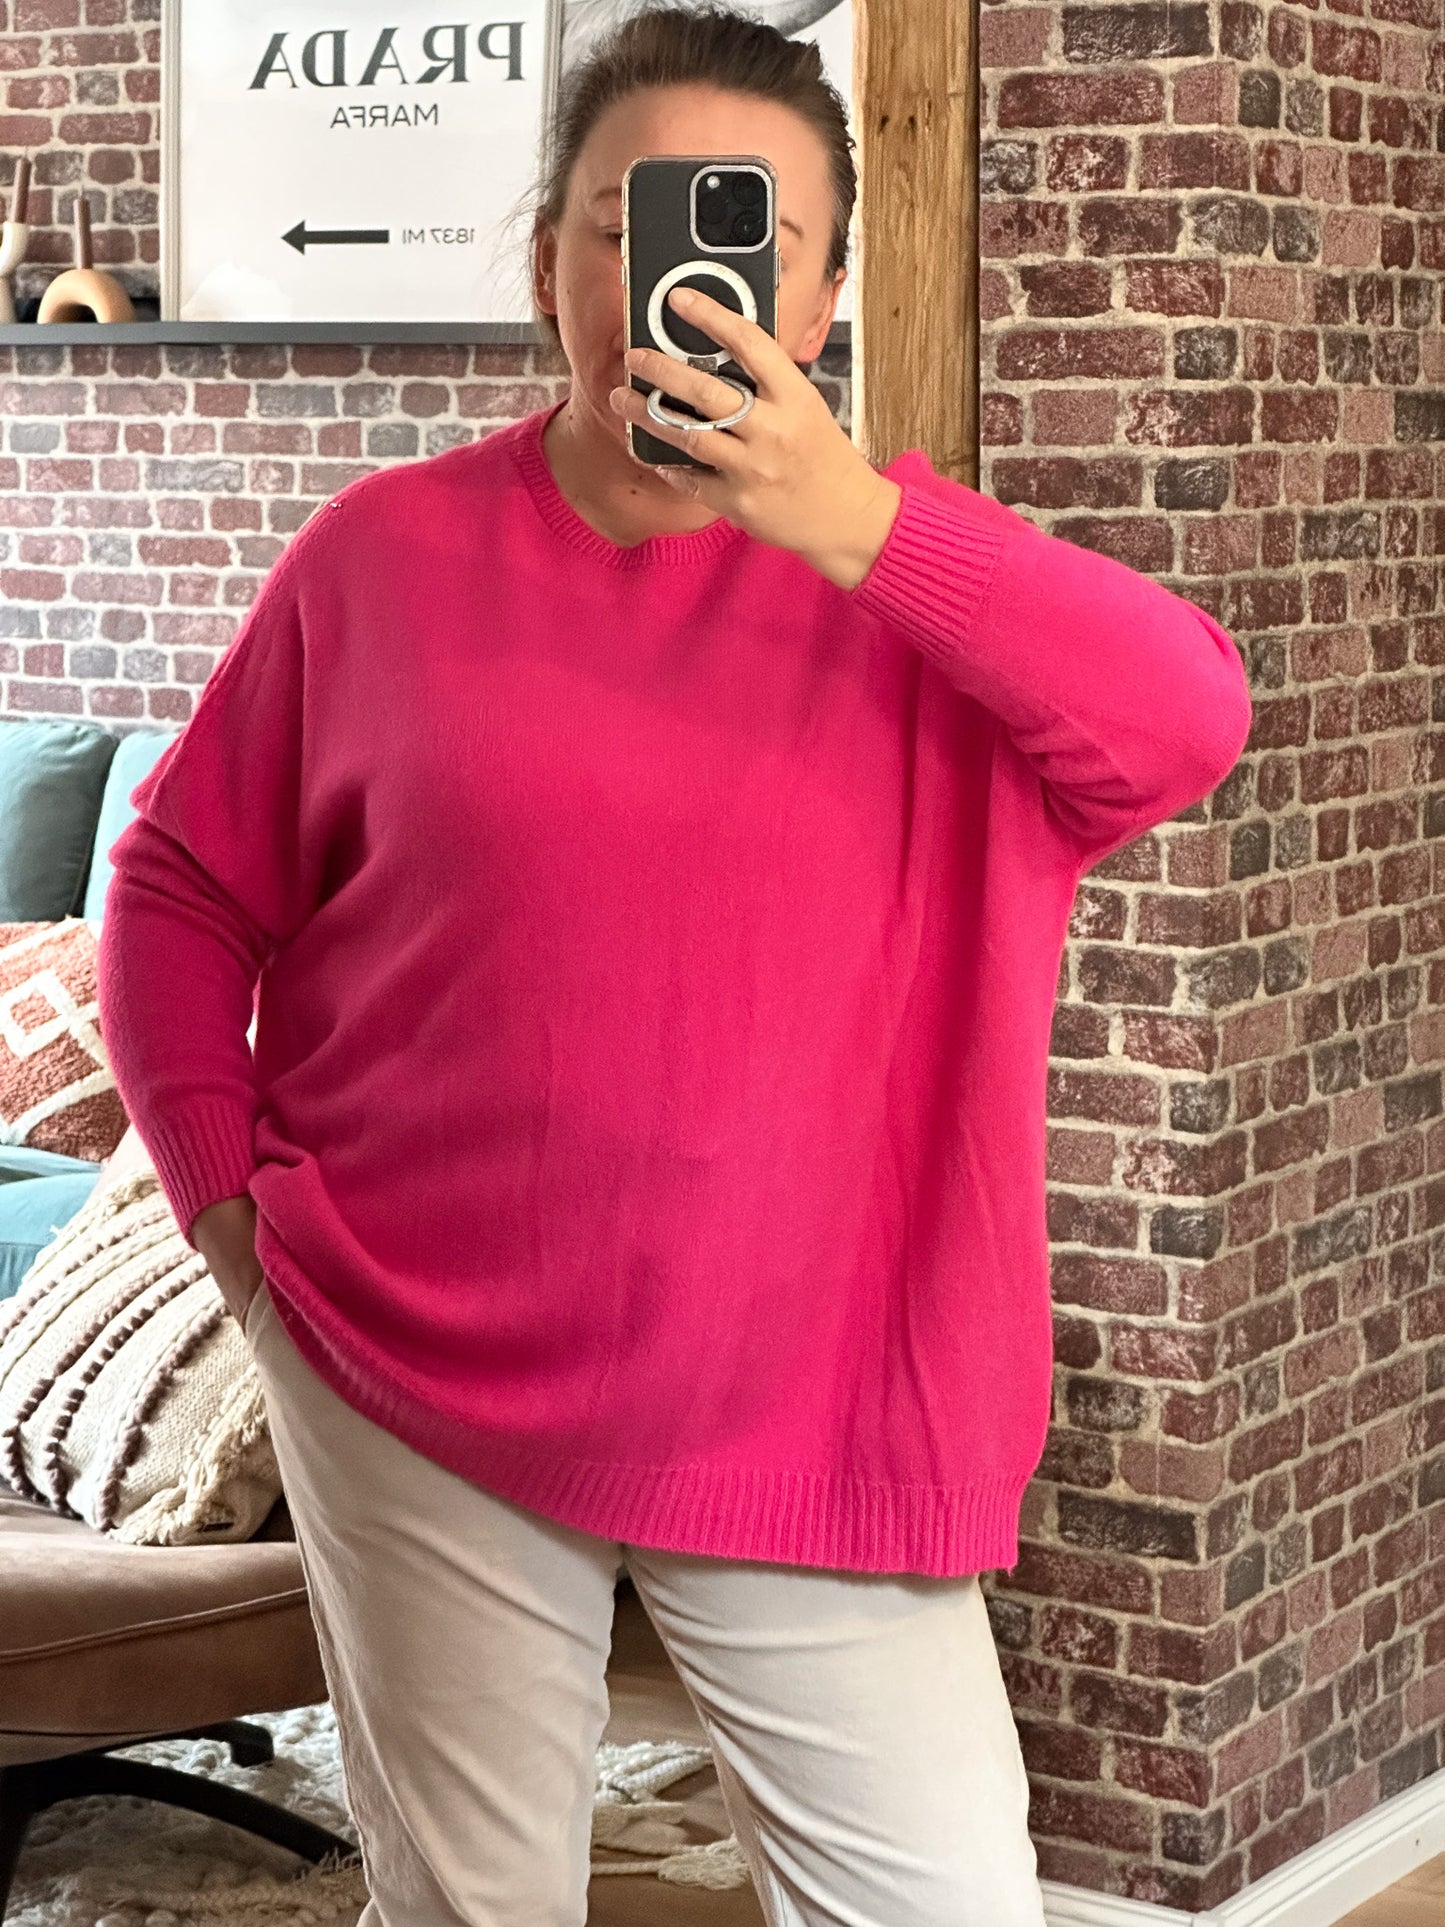 MONDAY AFTERNOON FEINSTRICK PULLOVER OVERSIZE